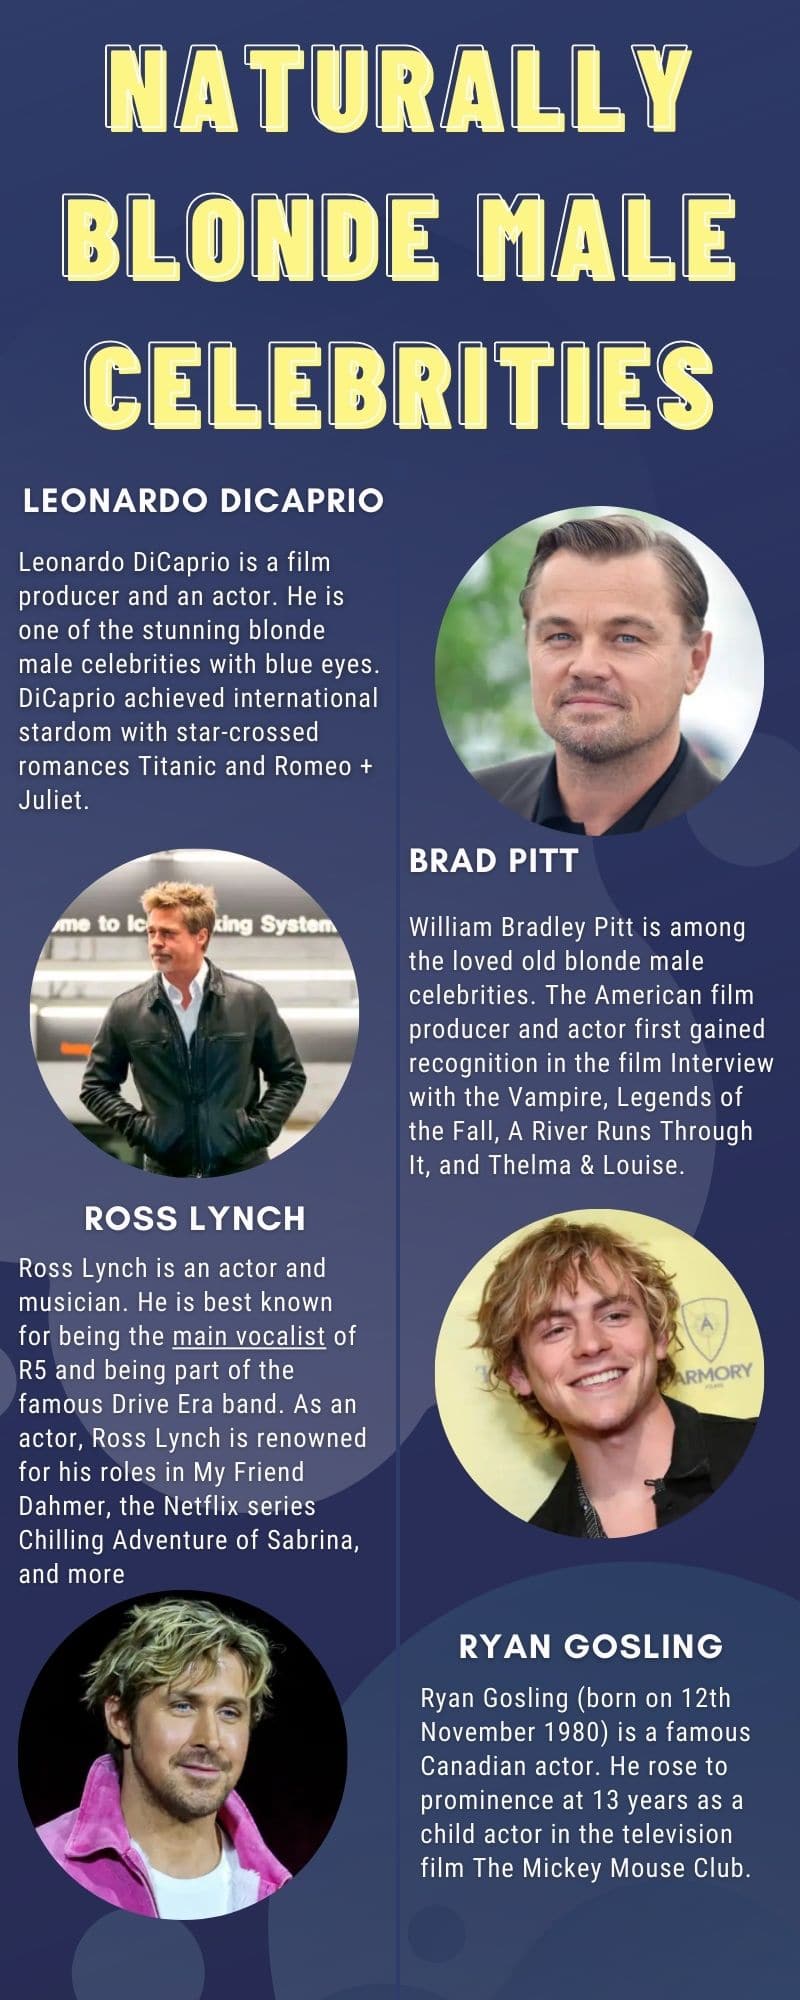 Naturally blonde male celebrities